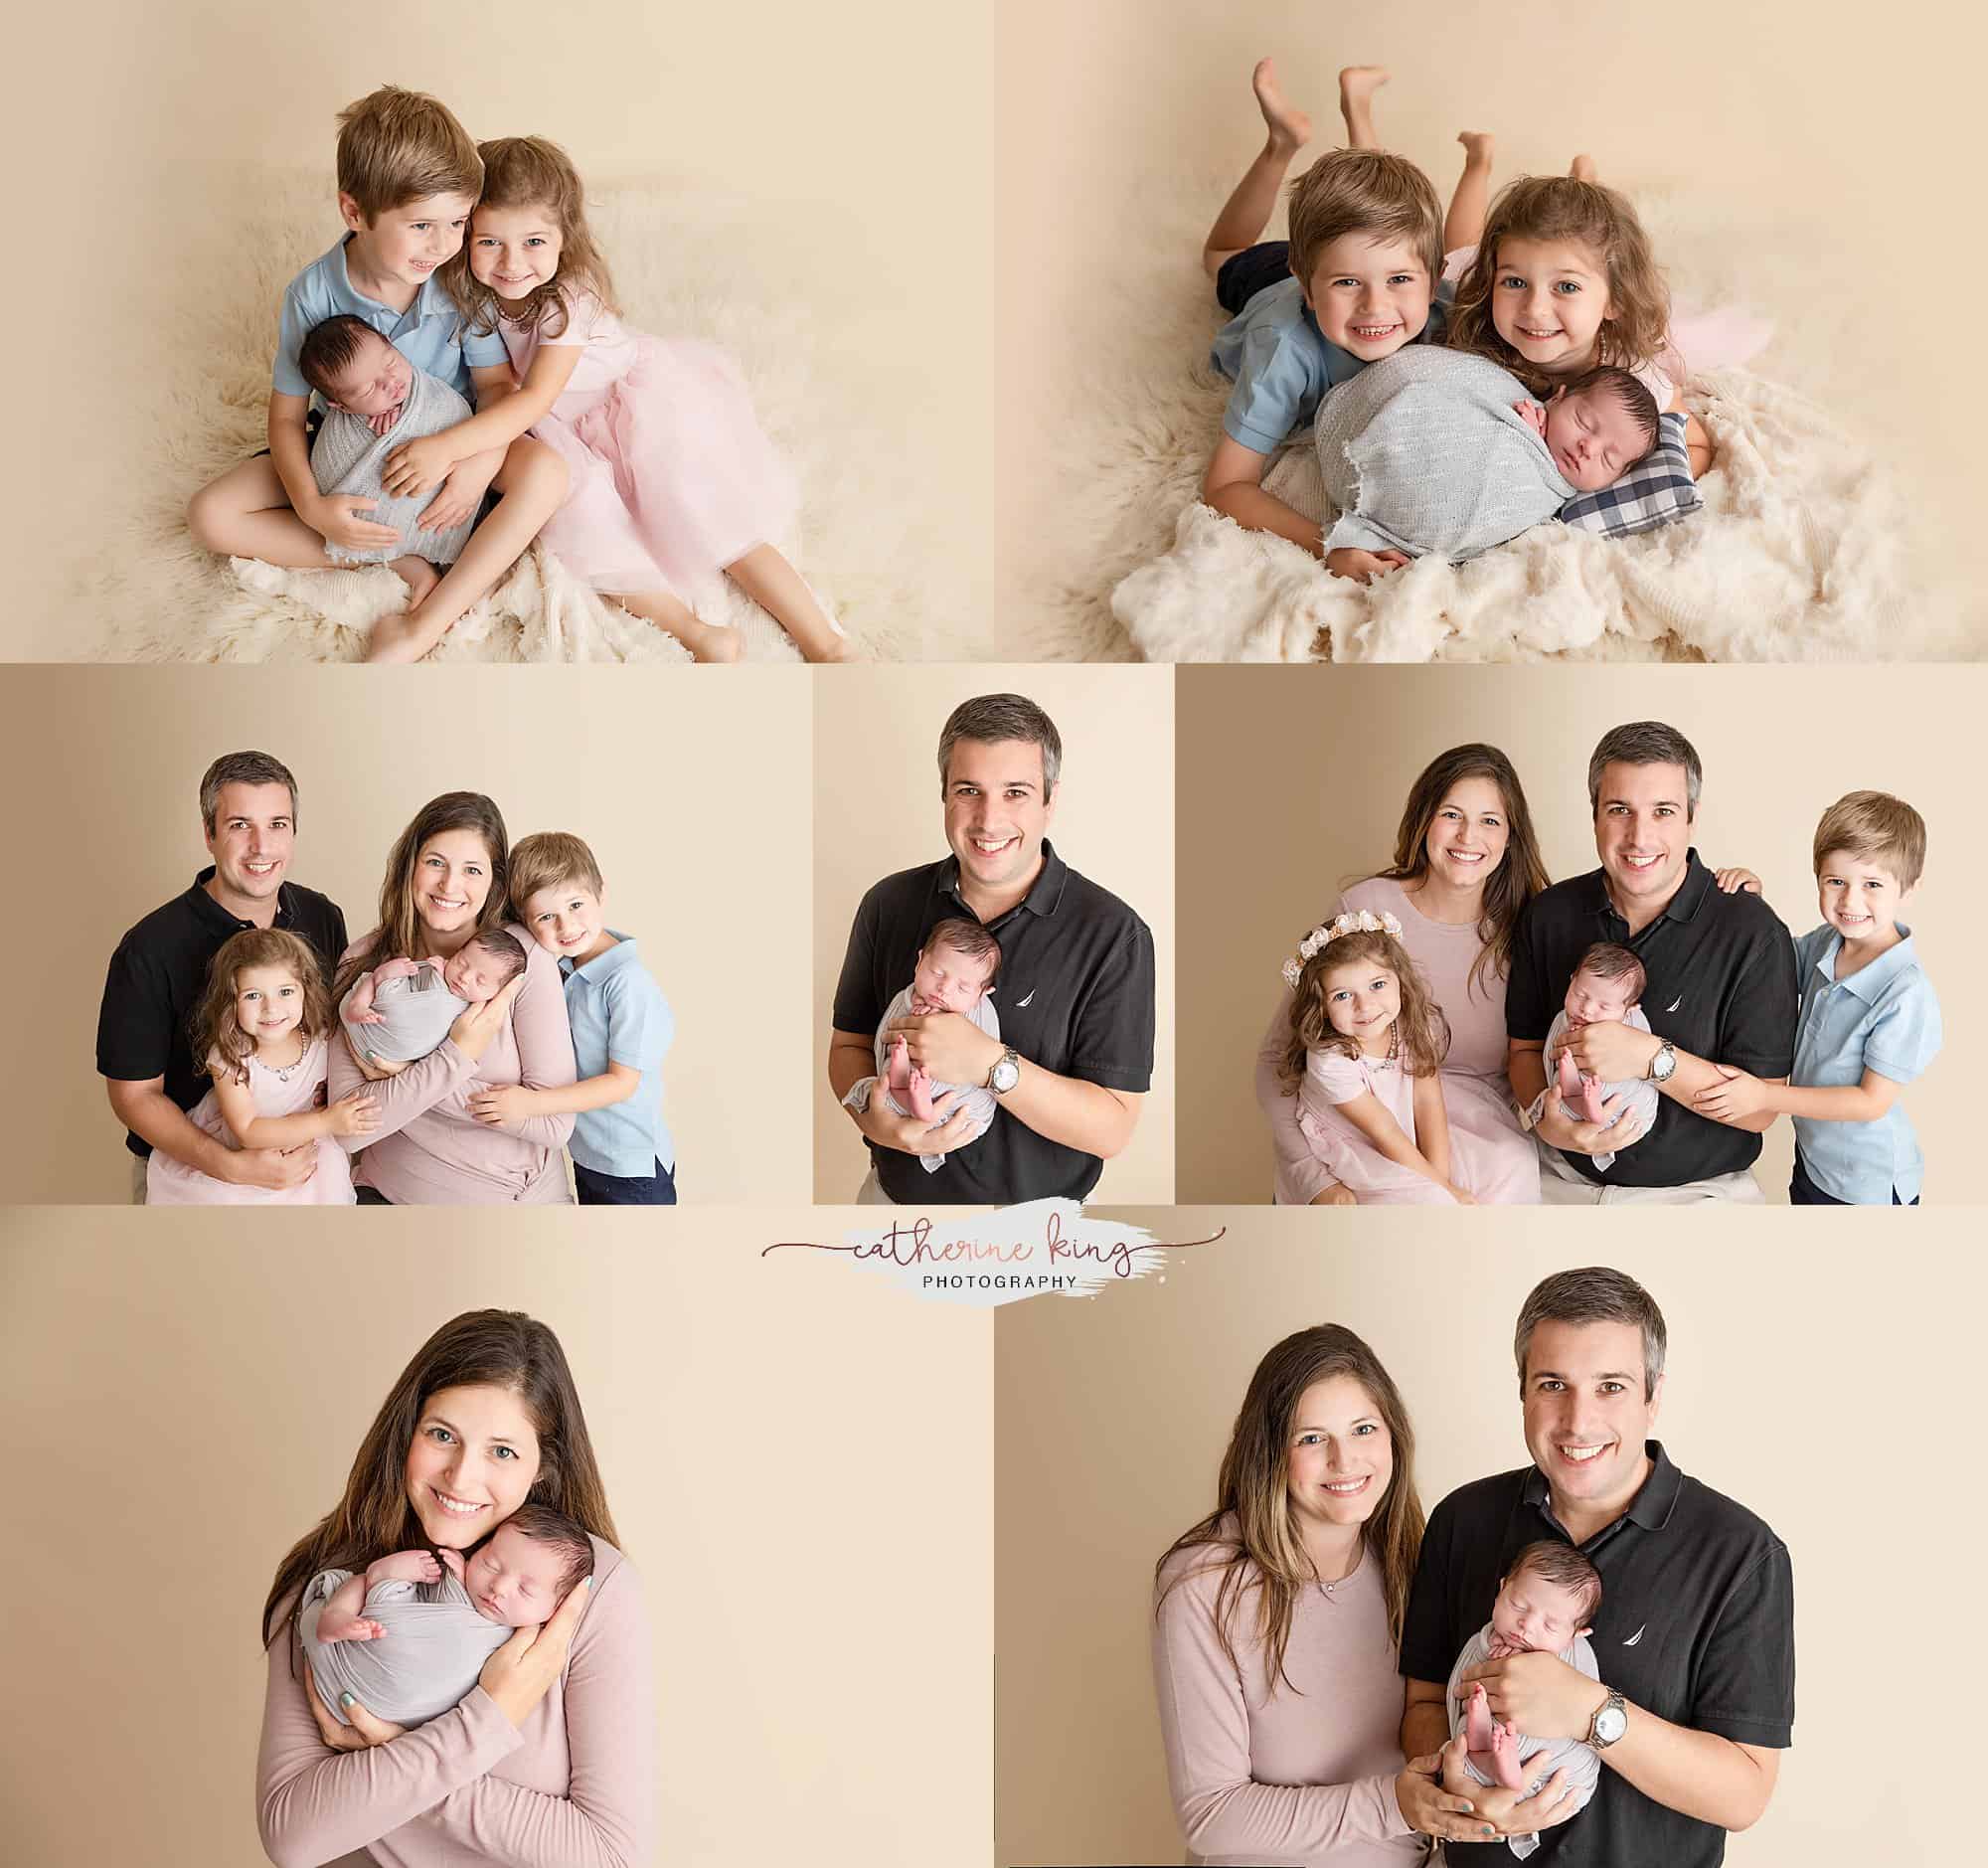 Landons newborn and family portrait photography in madison ct